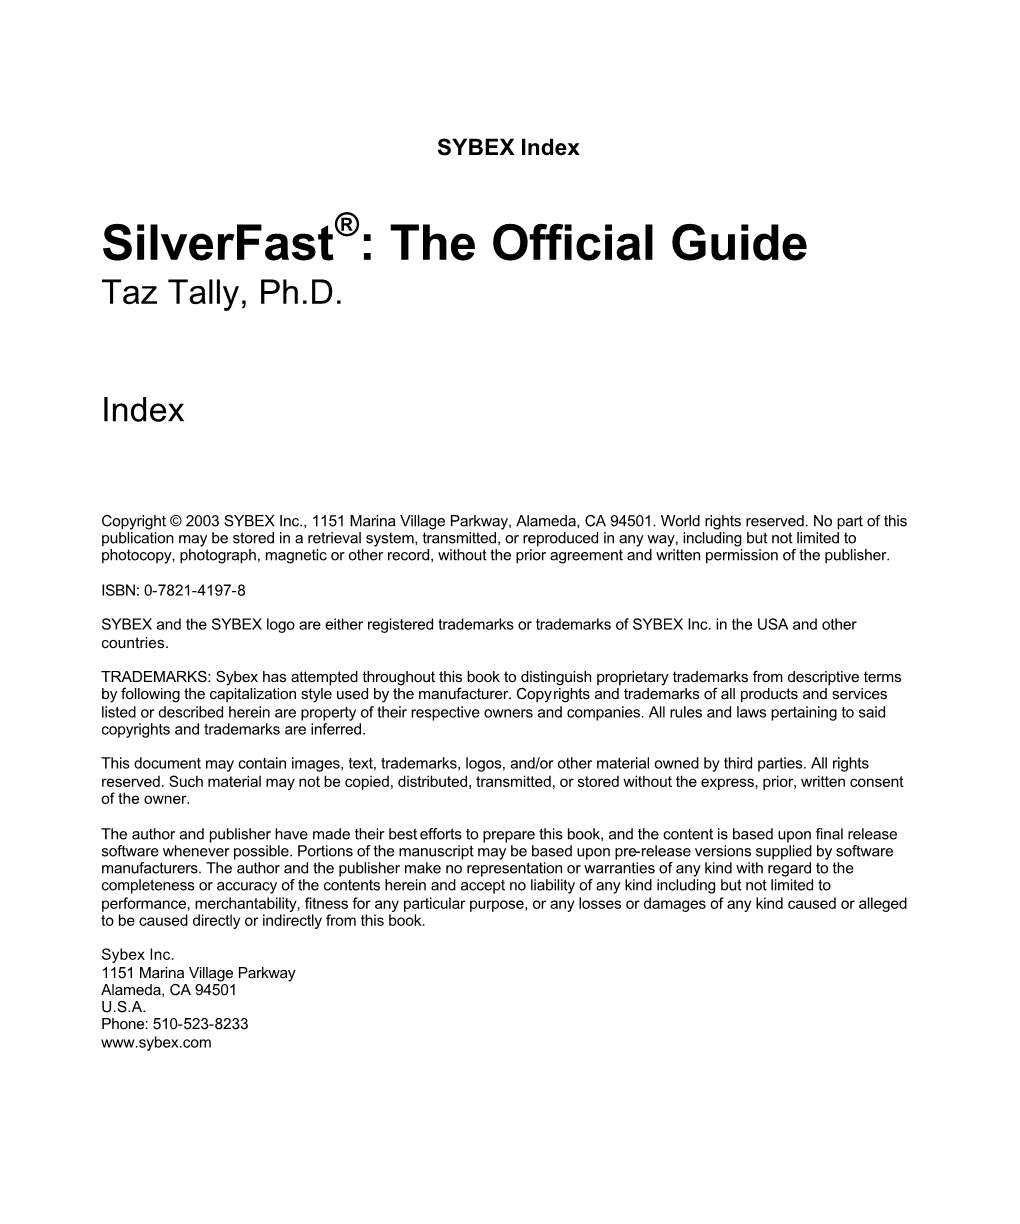 The Official Guide Taz Tally, Ph.D